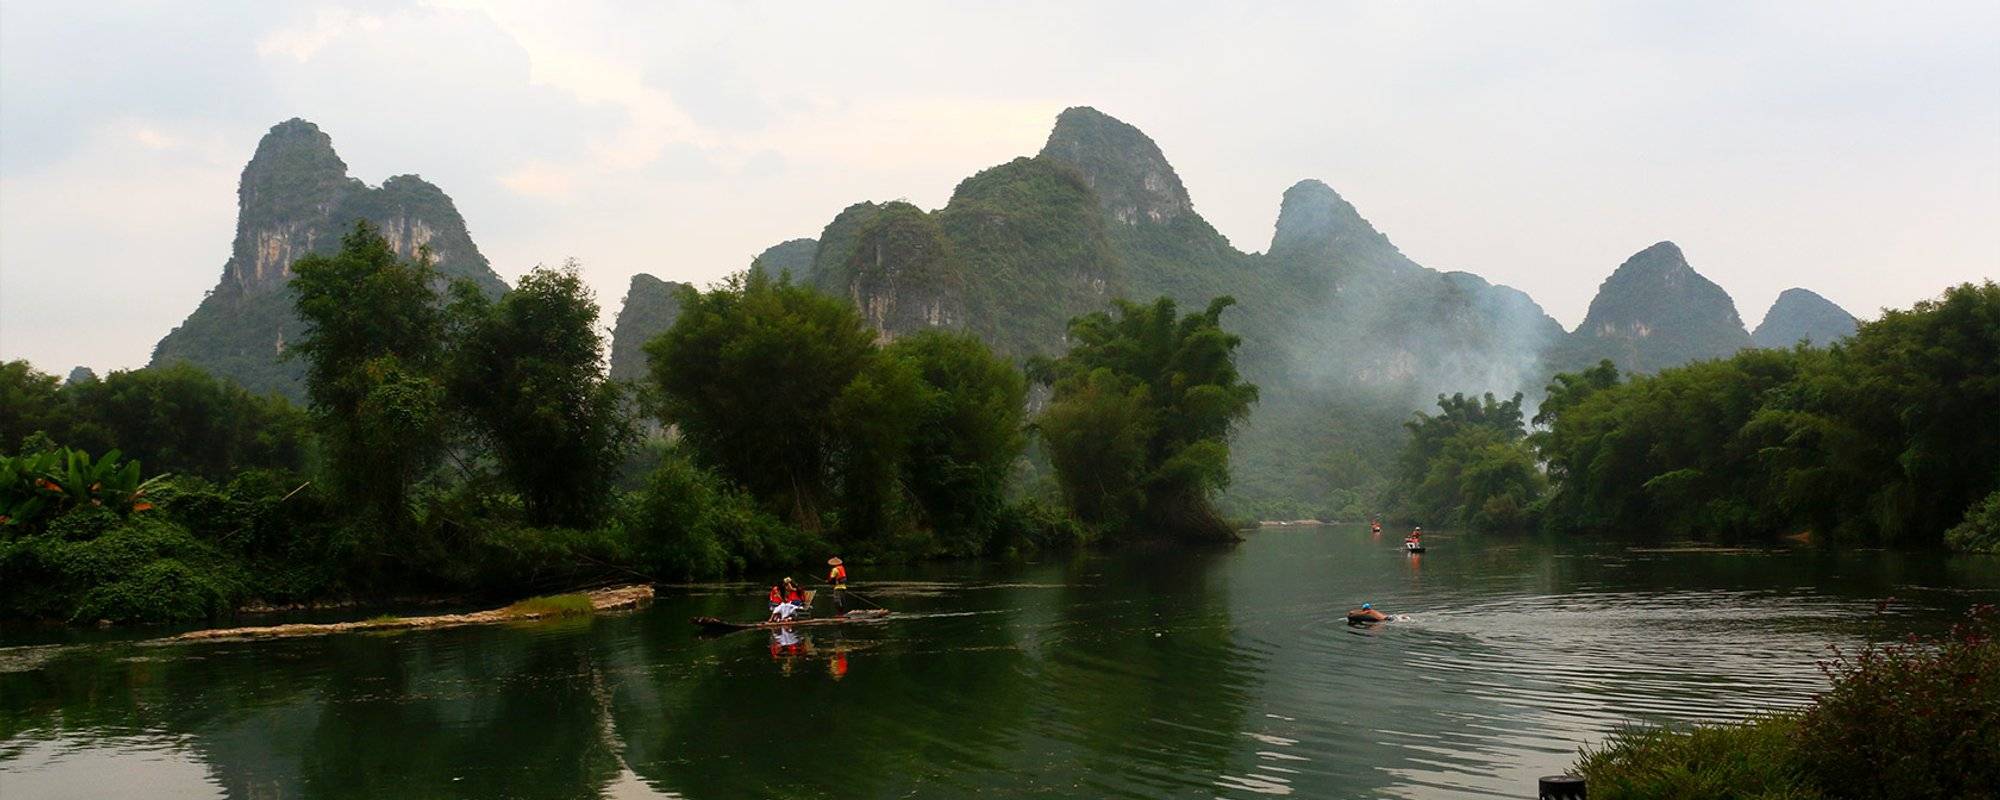 China #24: From Avatar to Karst Mountains [EN/GER]